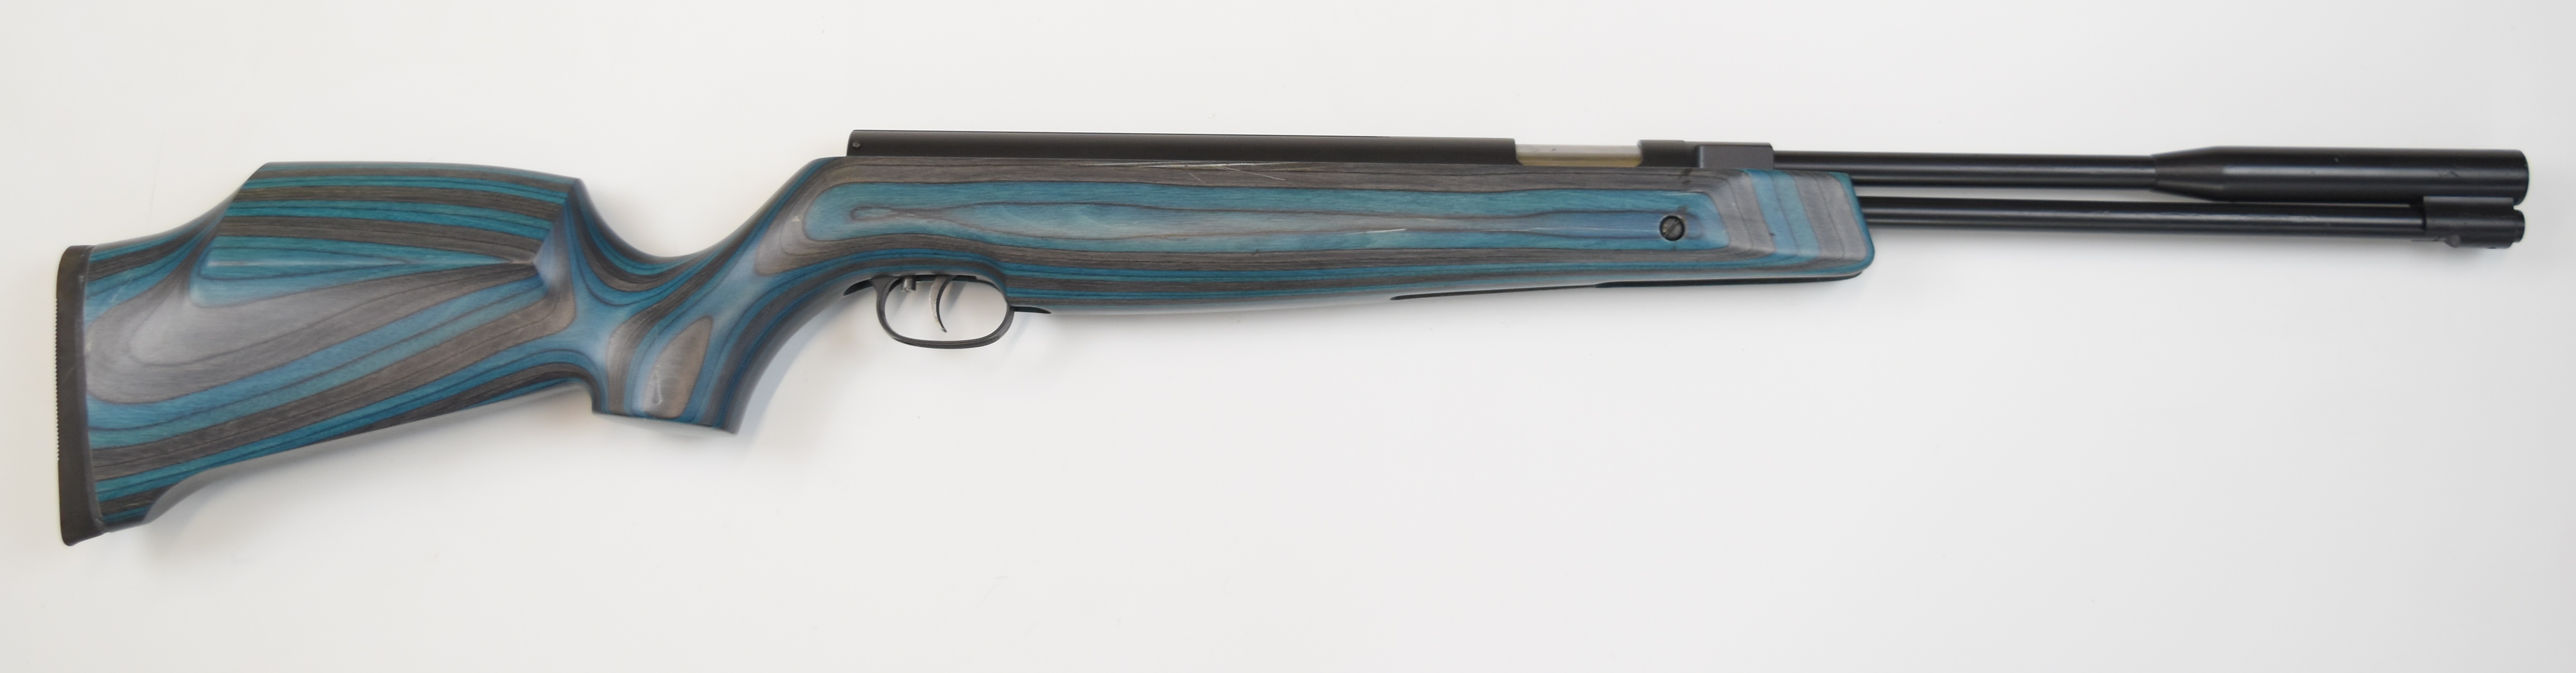 Weihrauch HW97K .177 underlever air rifle with blue laminated show wood stock, semi-pistol grip, - Image 4 of 9